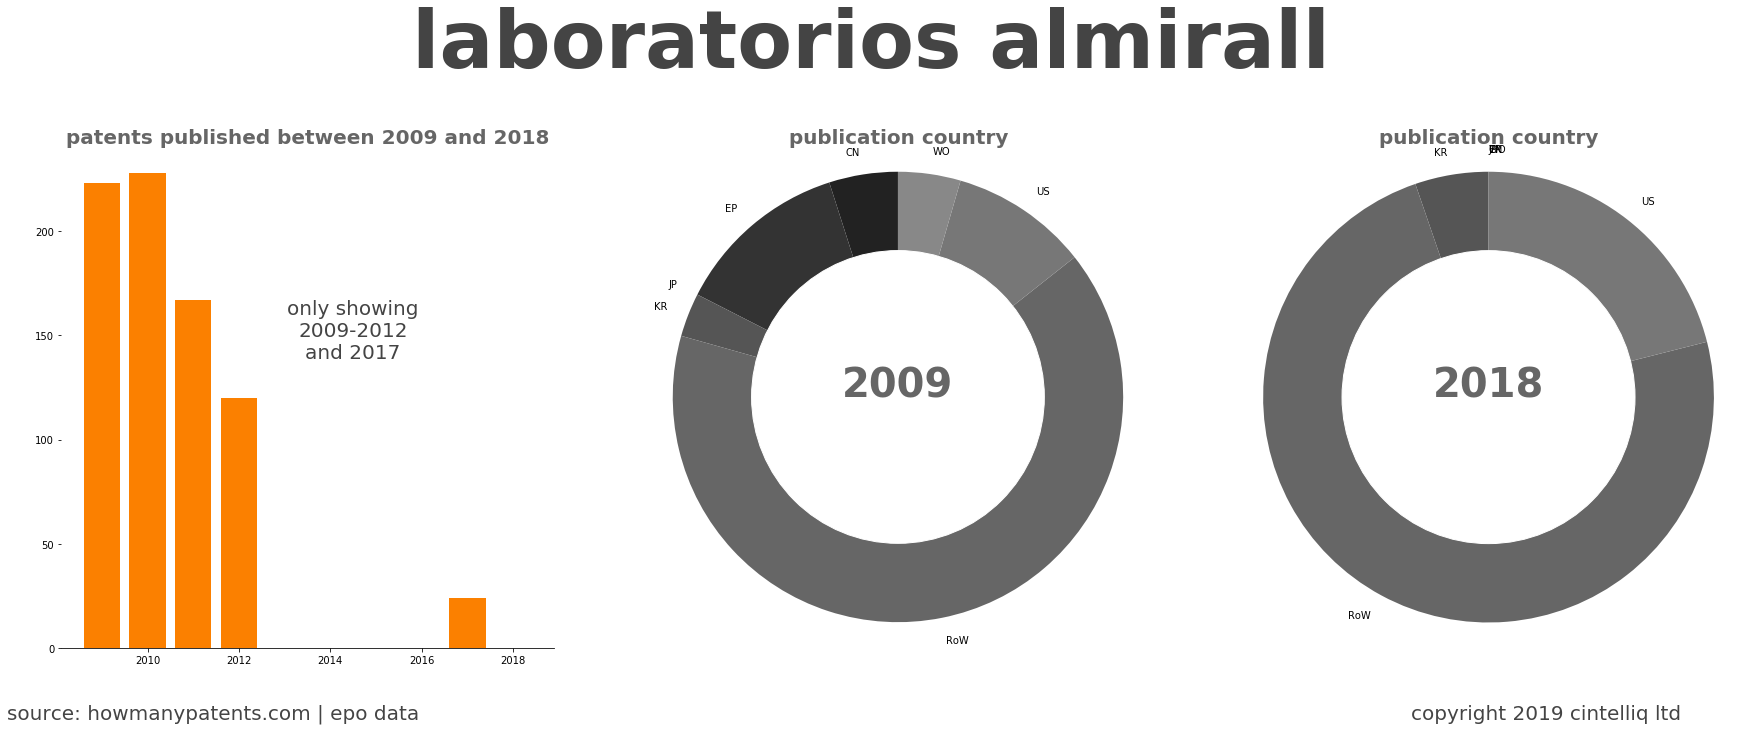 summary of patents for Laboratorios Almirall